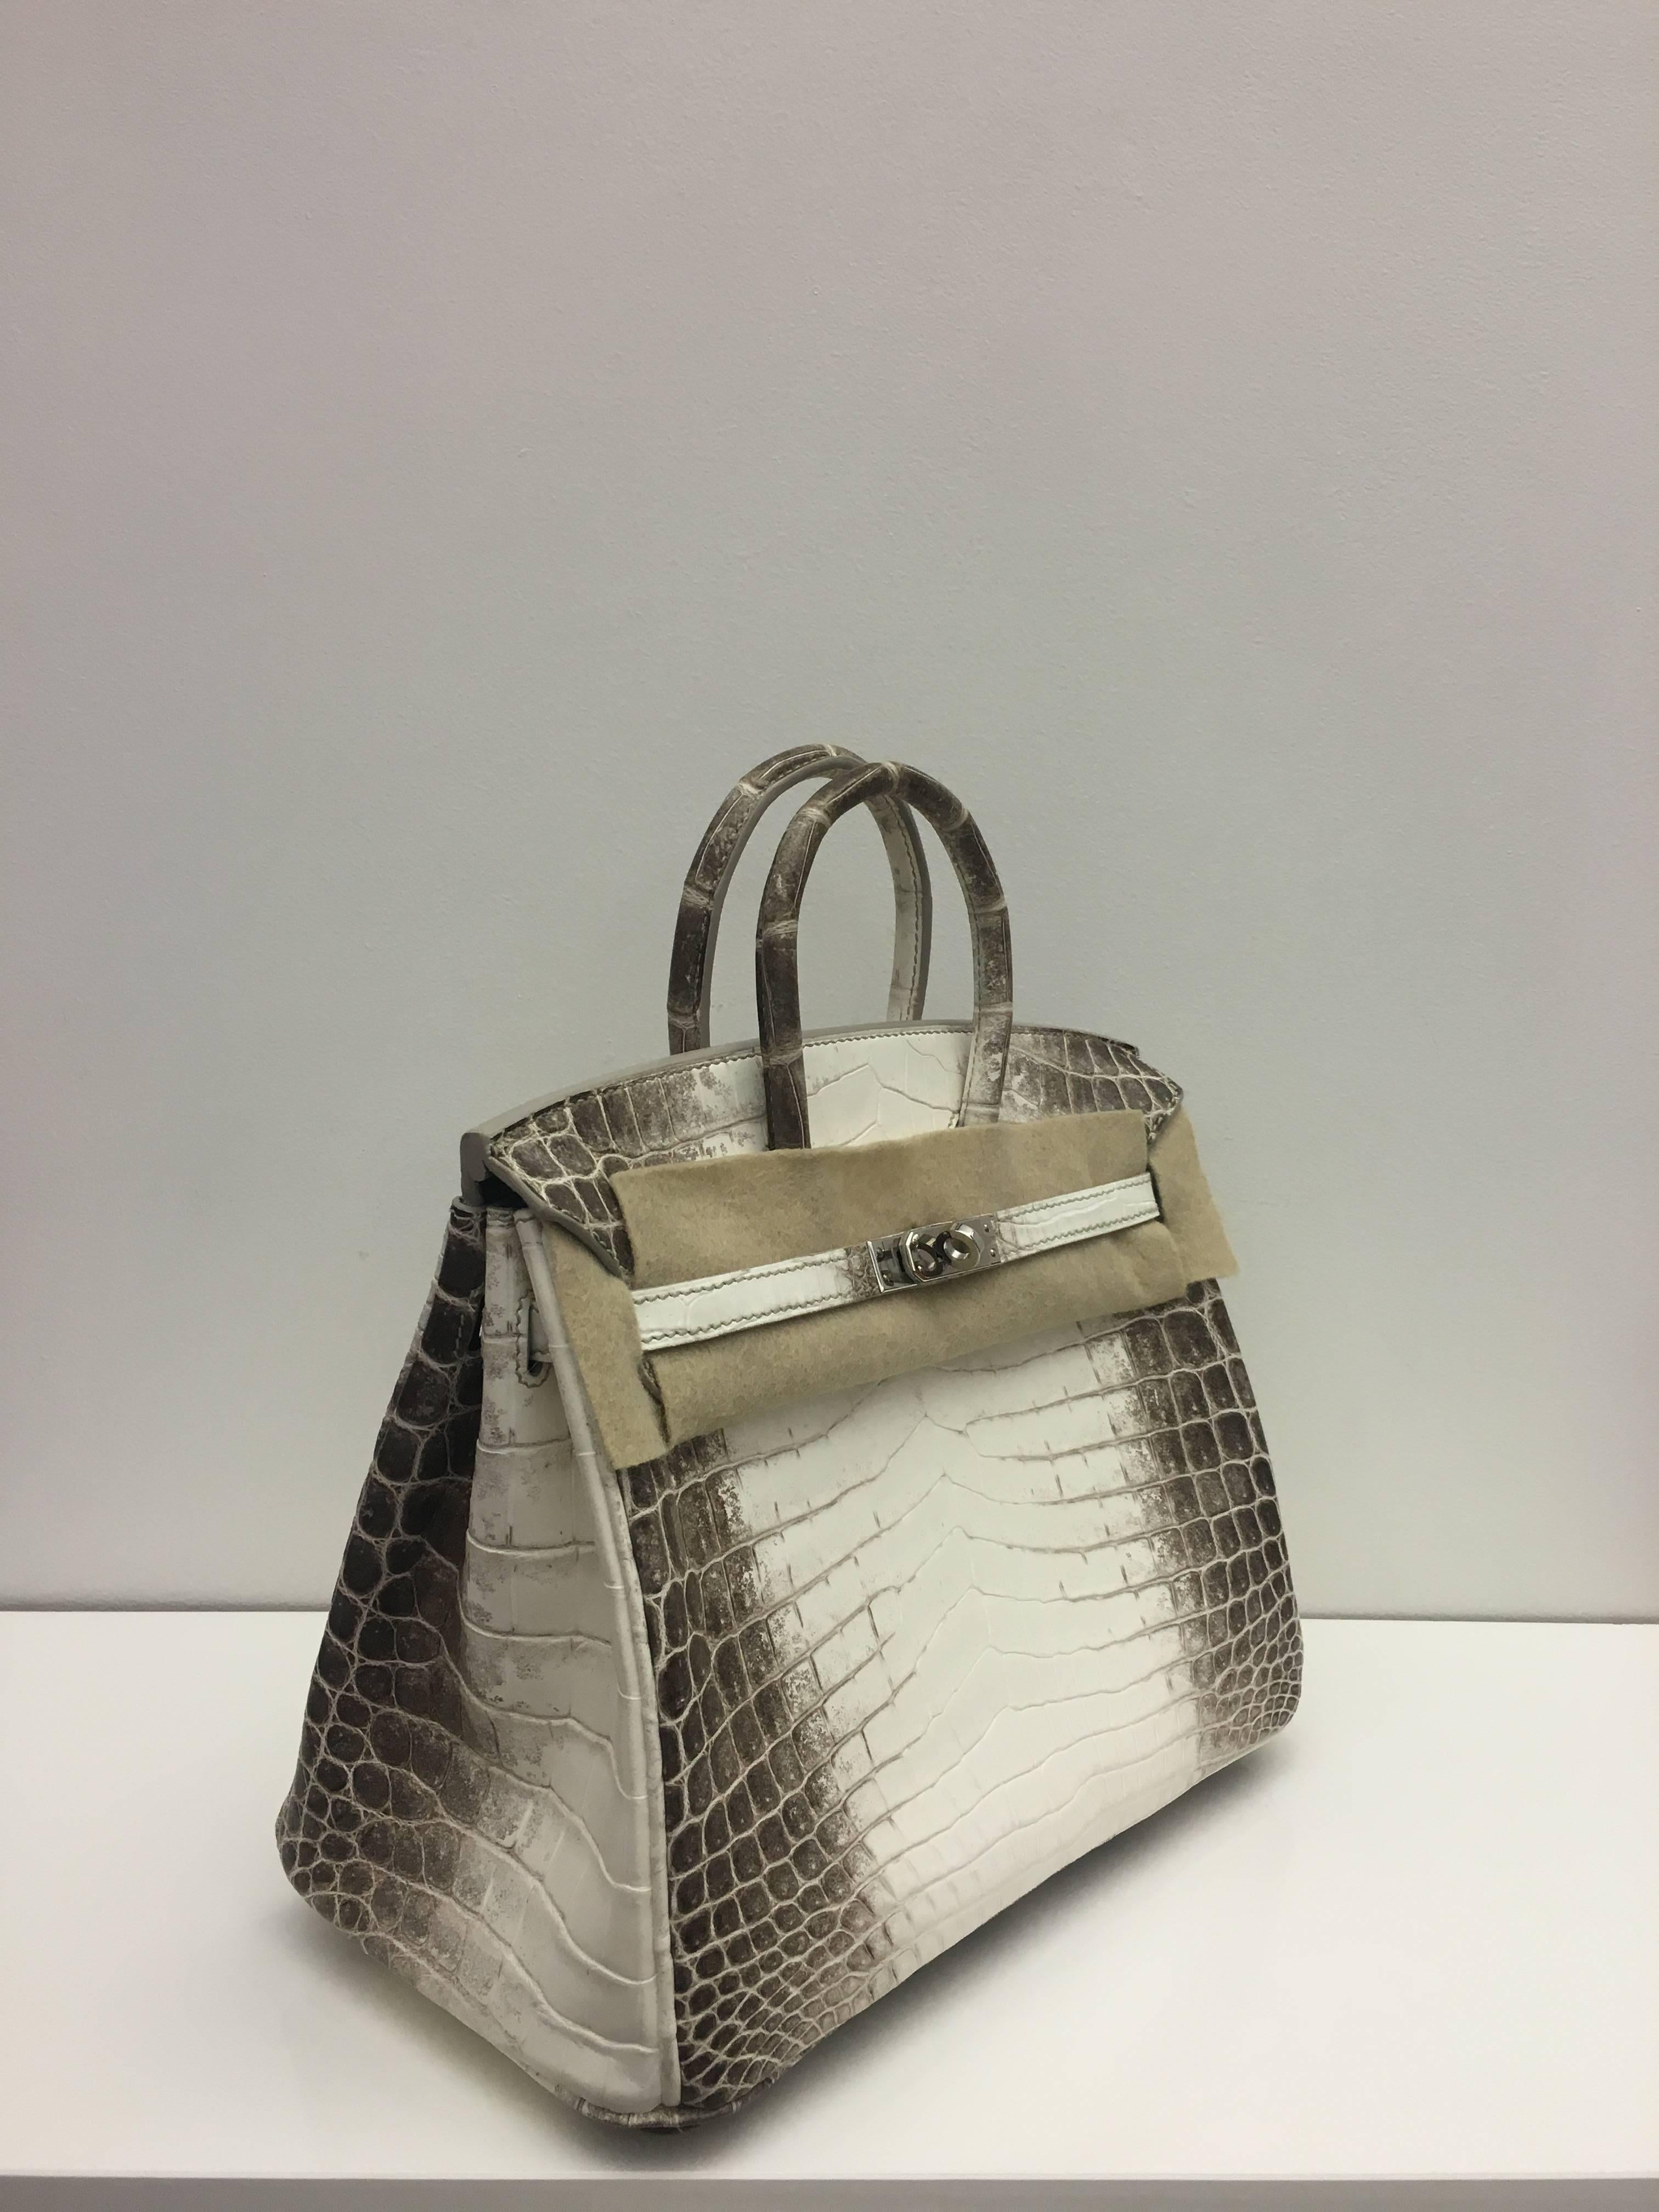 Hermes 
Birkin Size 25
Matte Croc
Colour Himalaya (ombre)
Silver Hardware 
store fresh, comes with receipt and full set (dust bag, box...) 
Hydeparkfashion specializes in sourcing and delivering authentic luxury handbags, mainly Hermes, to